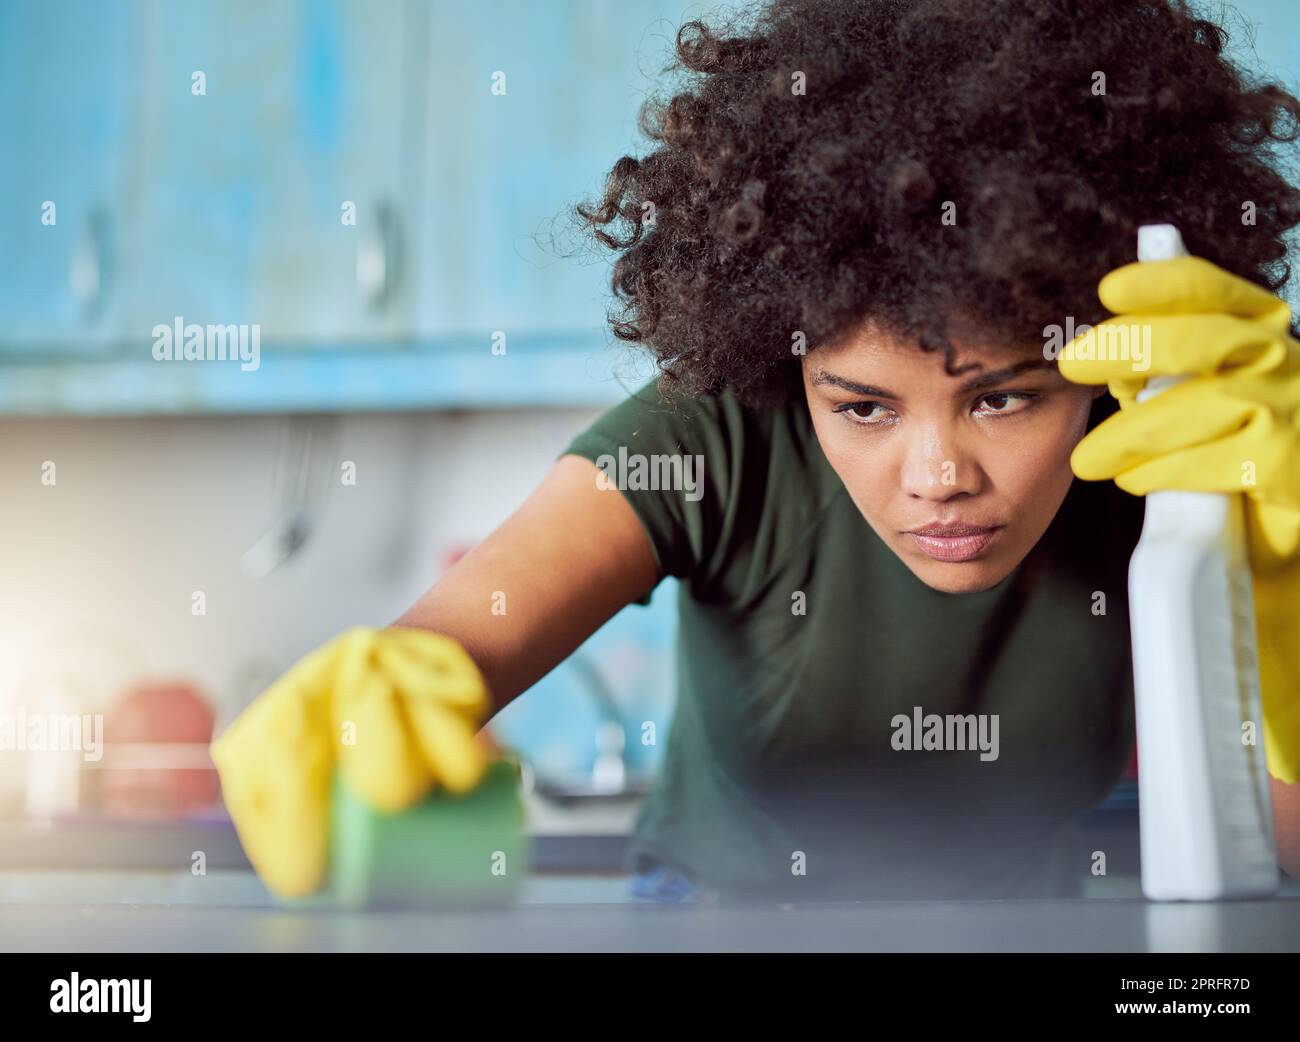 It takes concentration to remove stains. an attractive young woman with yellow gloves cleaning her home. Stock Photo